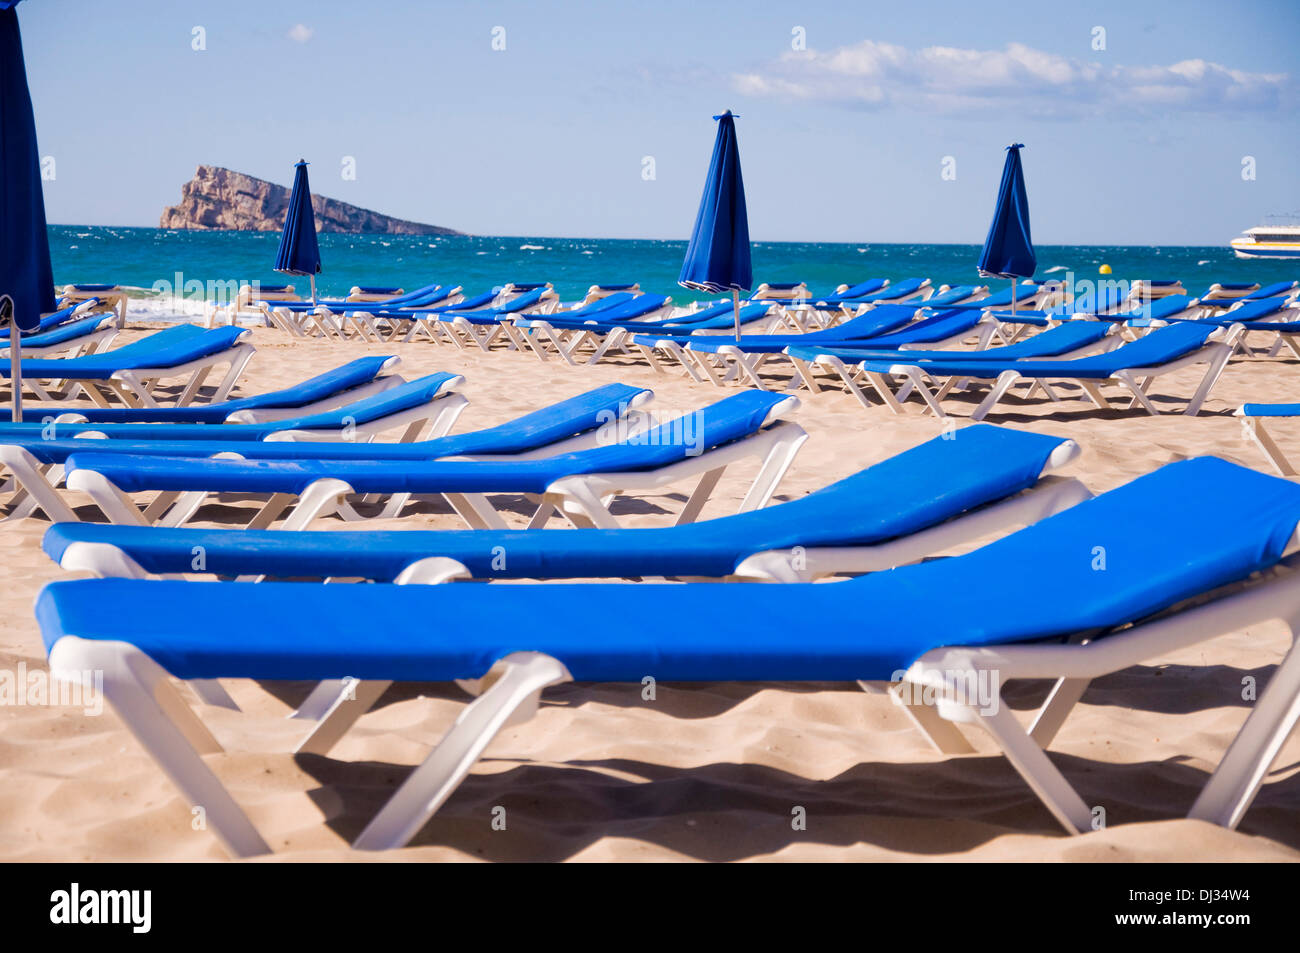 A group of sunbeds in the beach of Benidorm Stock Photo